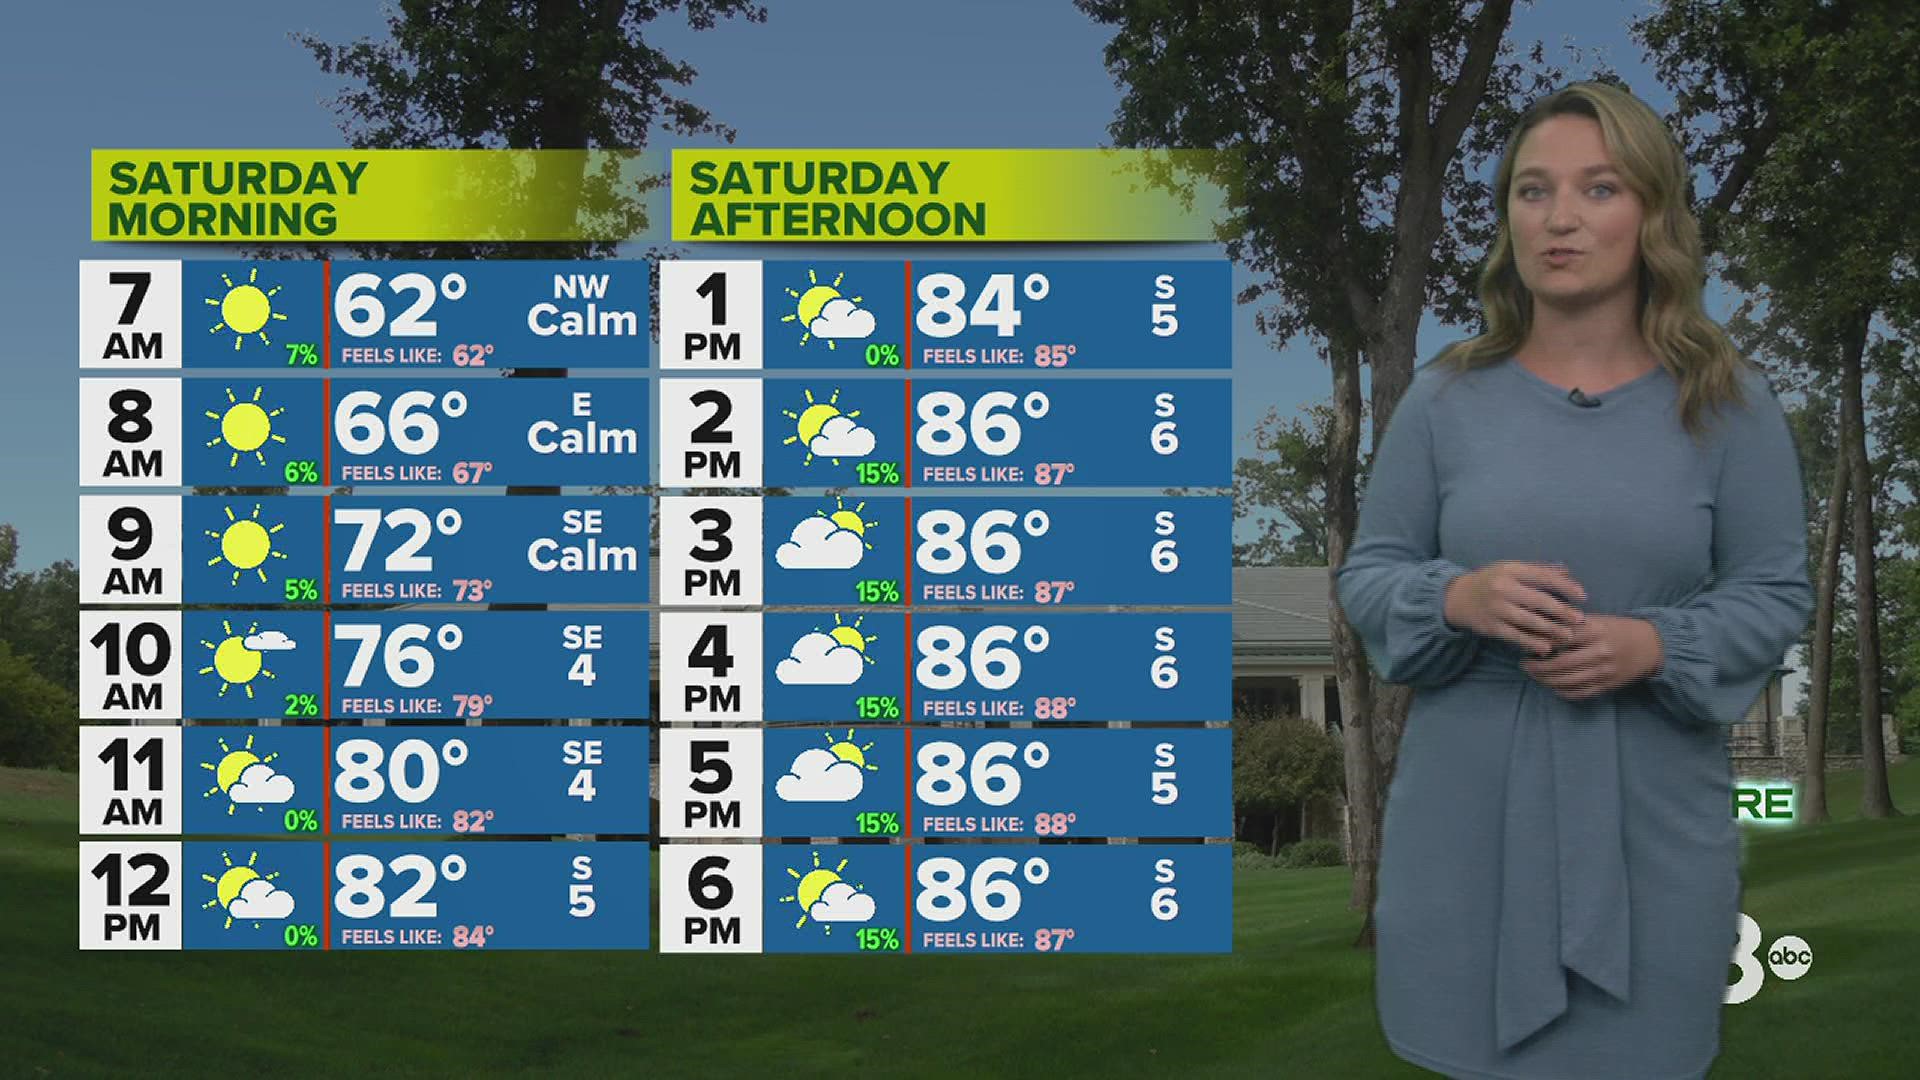 Clearing skies and more comfortable humidity for Saturday